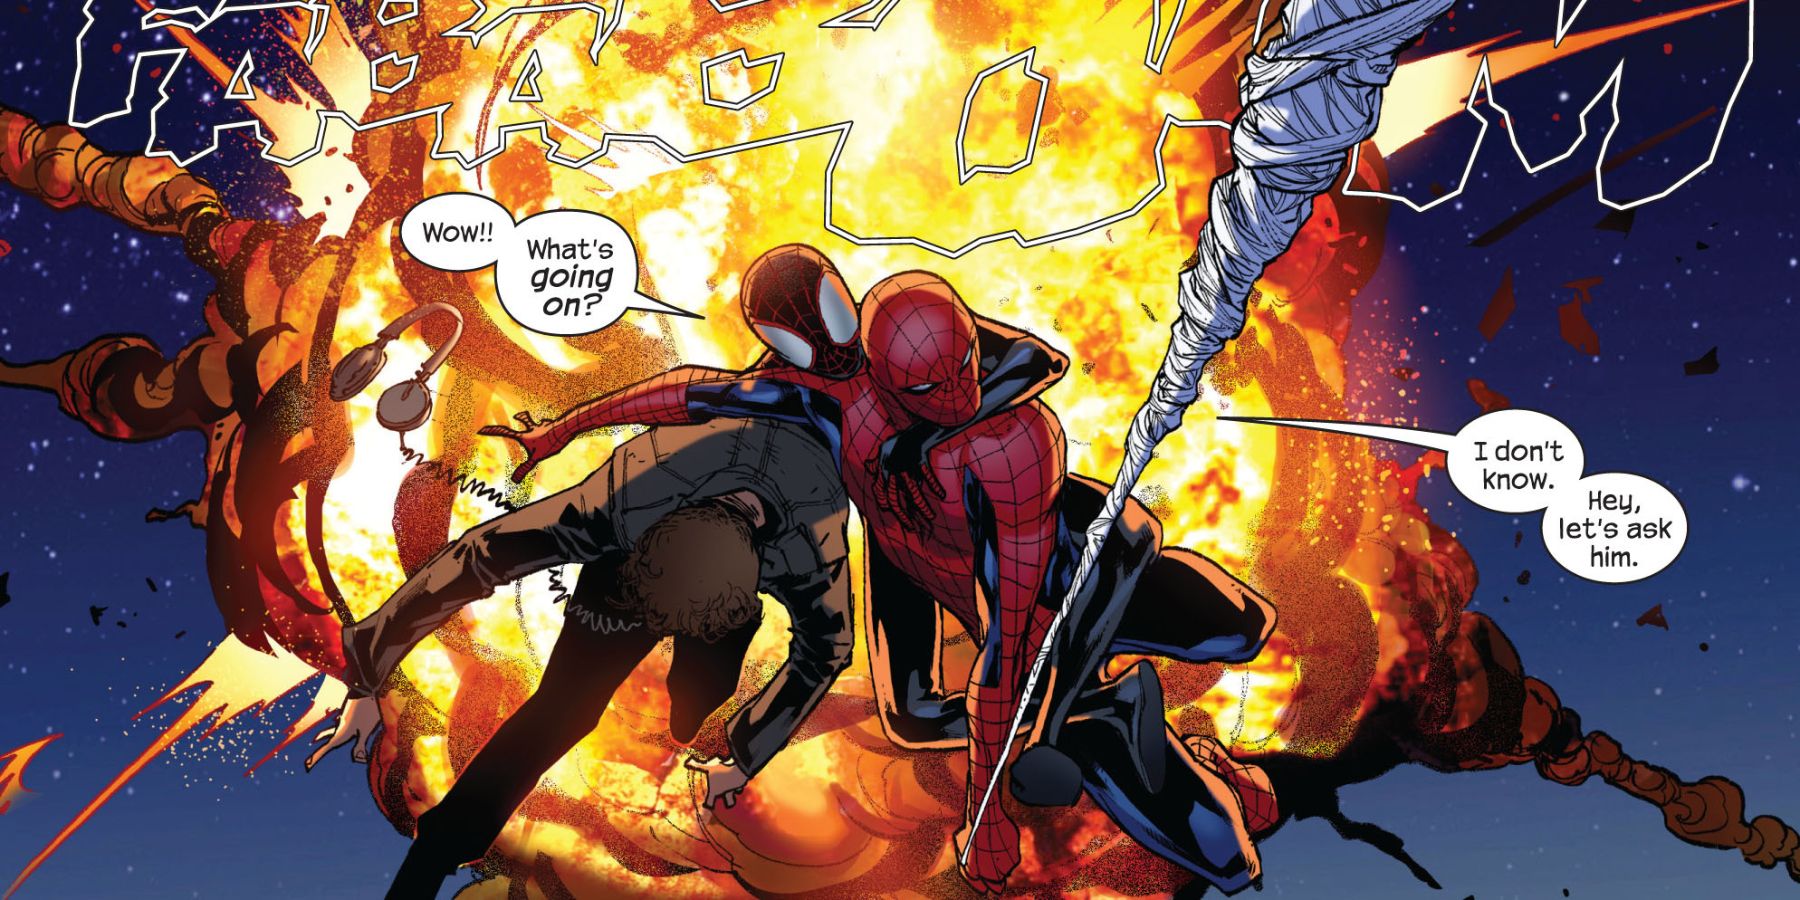 Peter Parker and Miles Morales escaping from an exploding helicopter in Spider-Men